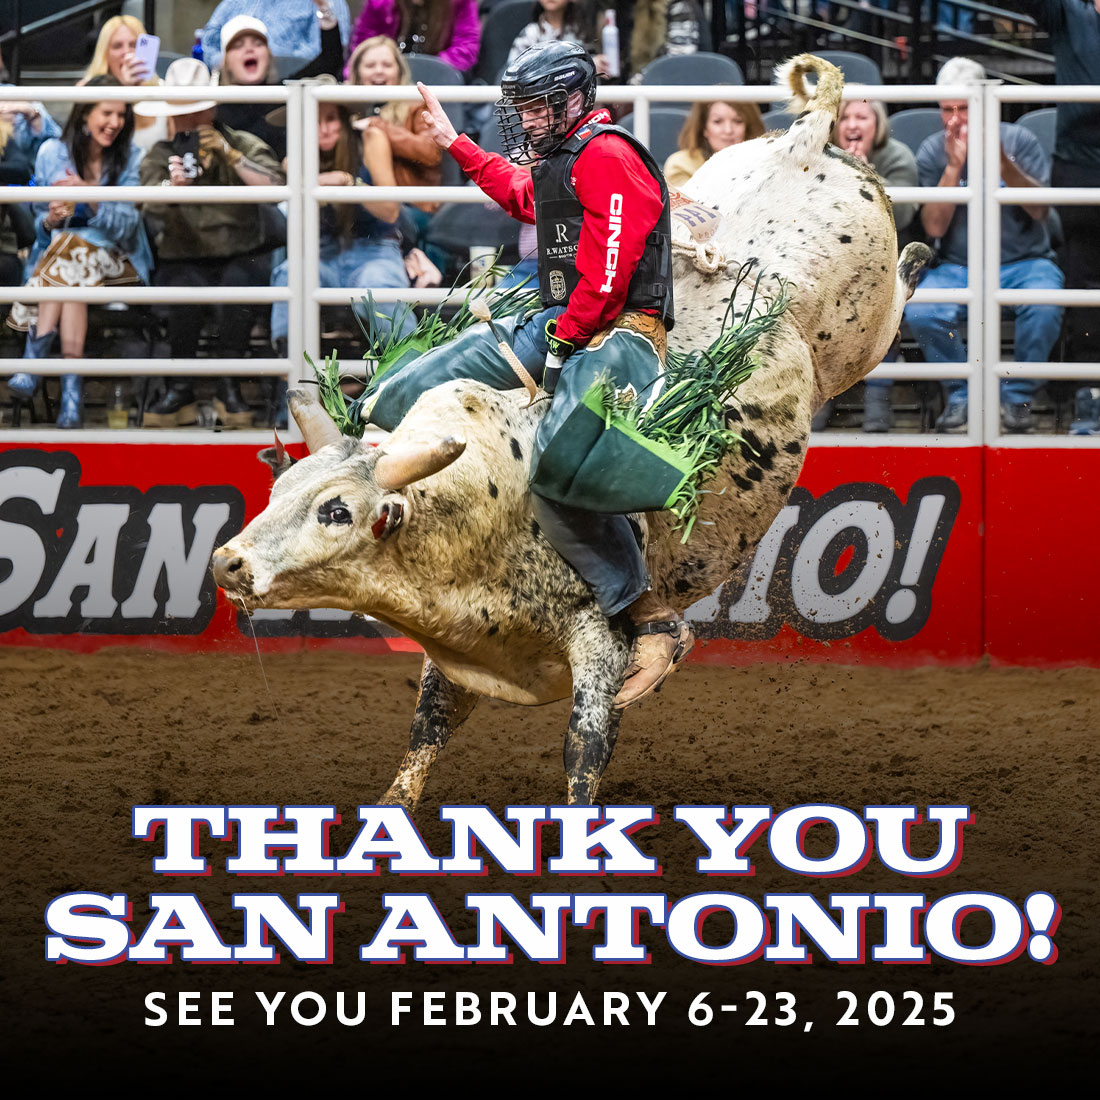 As the 2024 Rodeo has come to a close, there's nothing left to say but THANK YOU! See y’all Feb. 6-23, 2025!